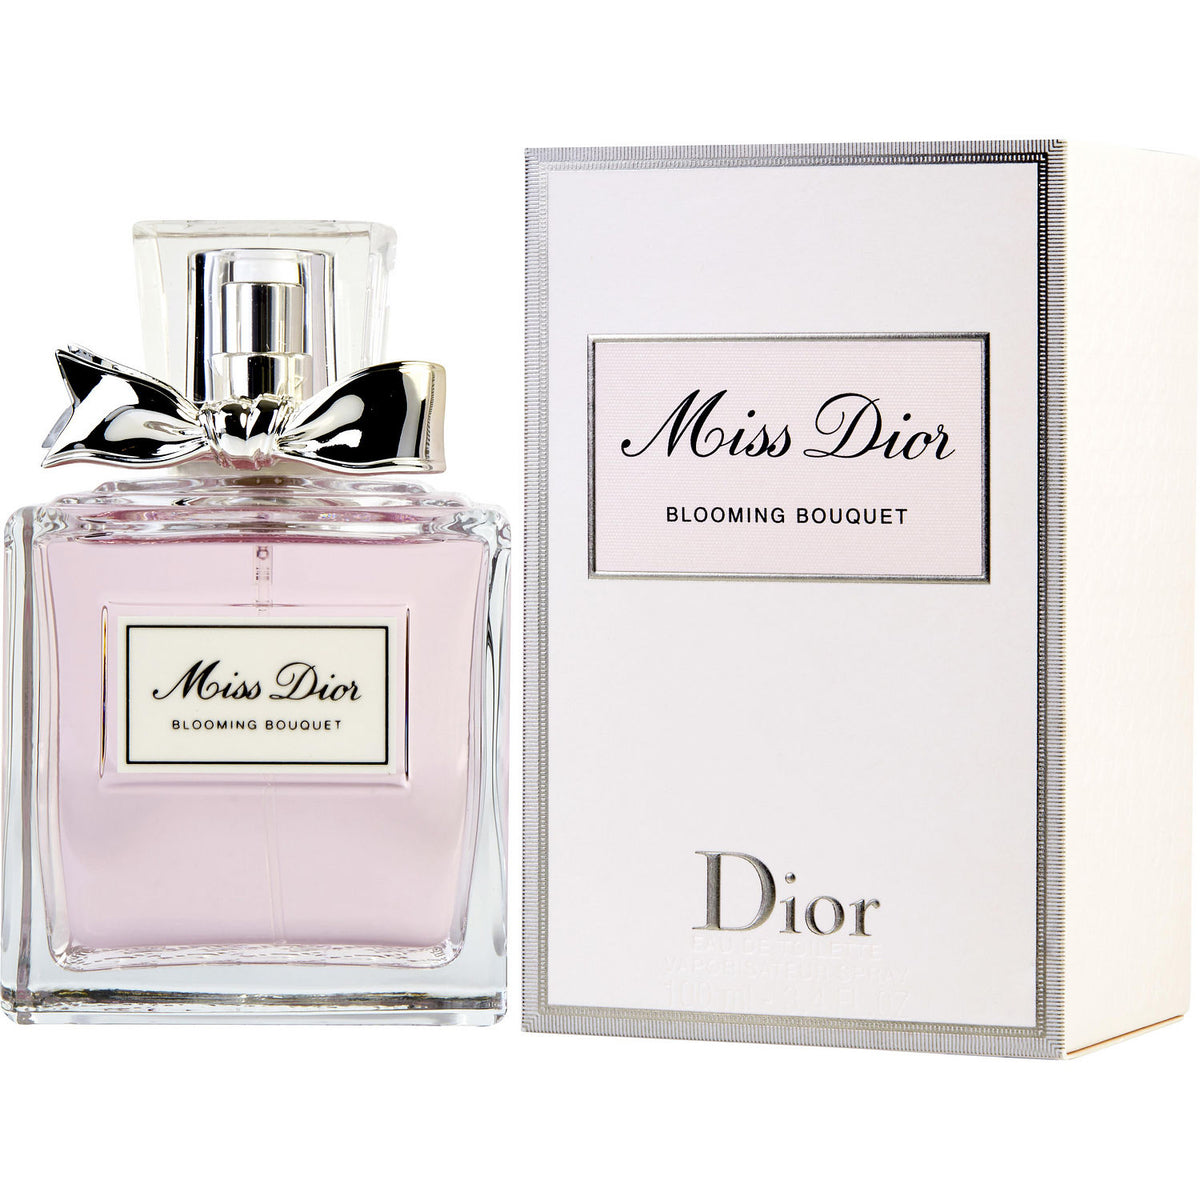 Miss Absolutely Blooming Eau De Parfum by Dior Fragrance Samples, DecantX